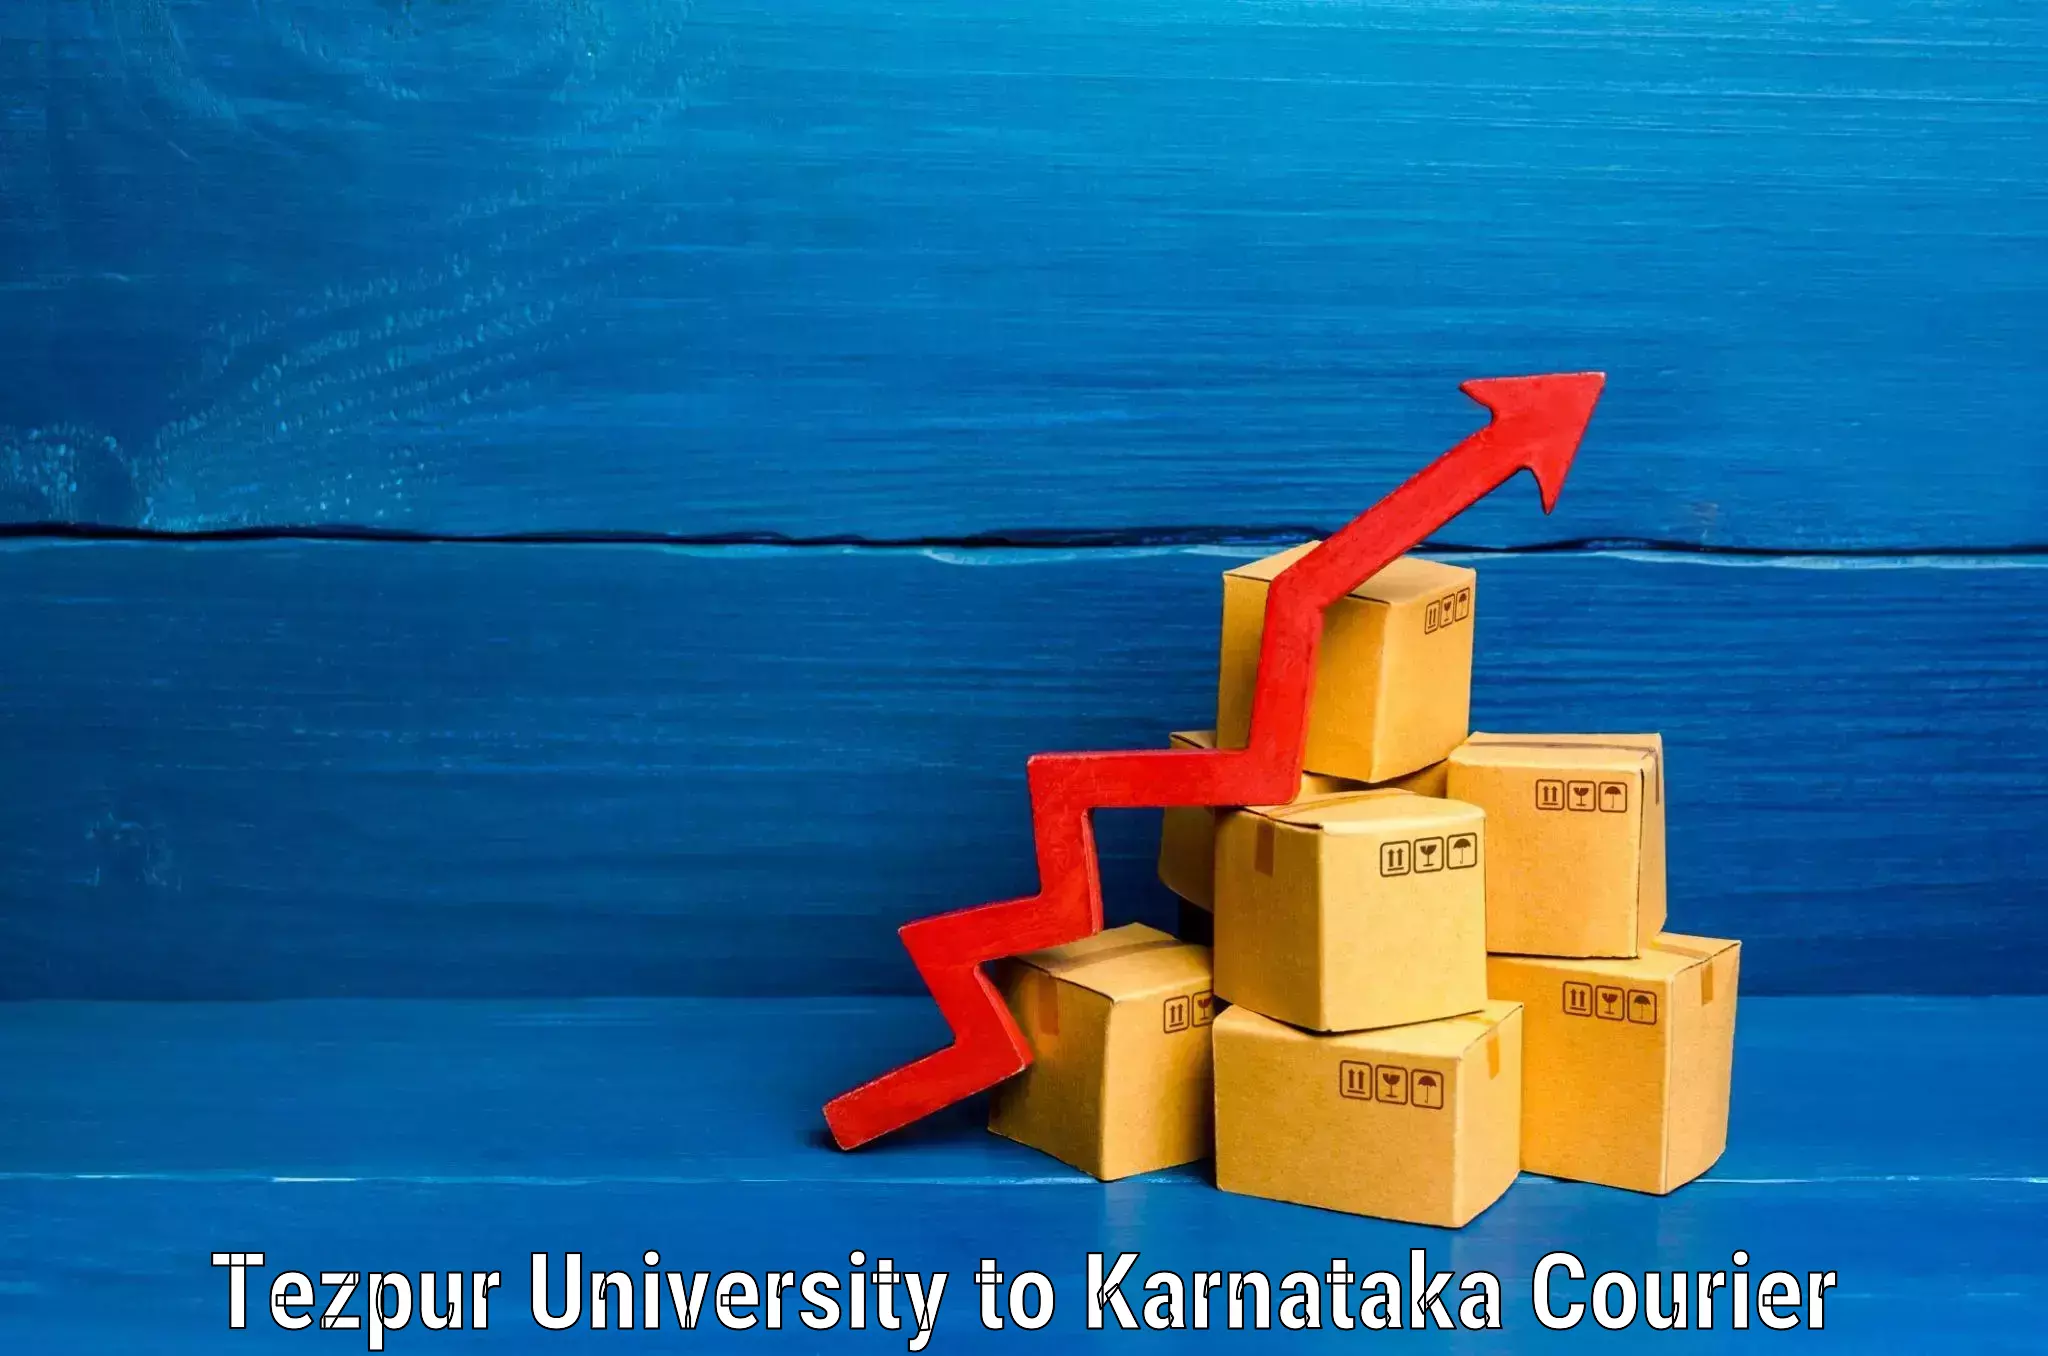 Global baggage shipping in Tezpur University to Manipal